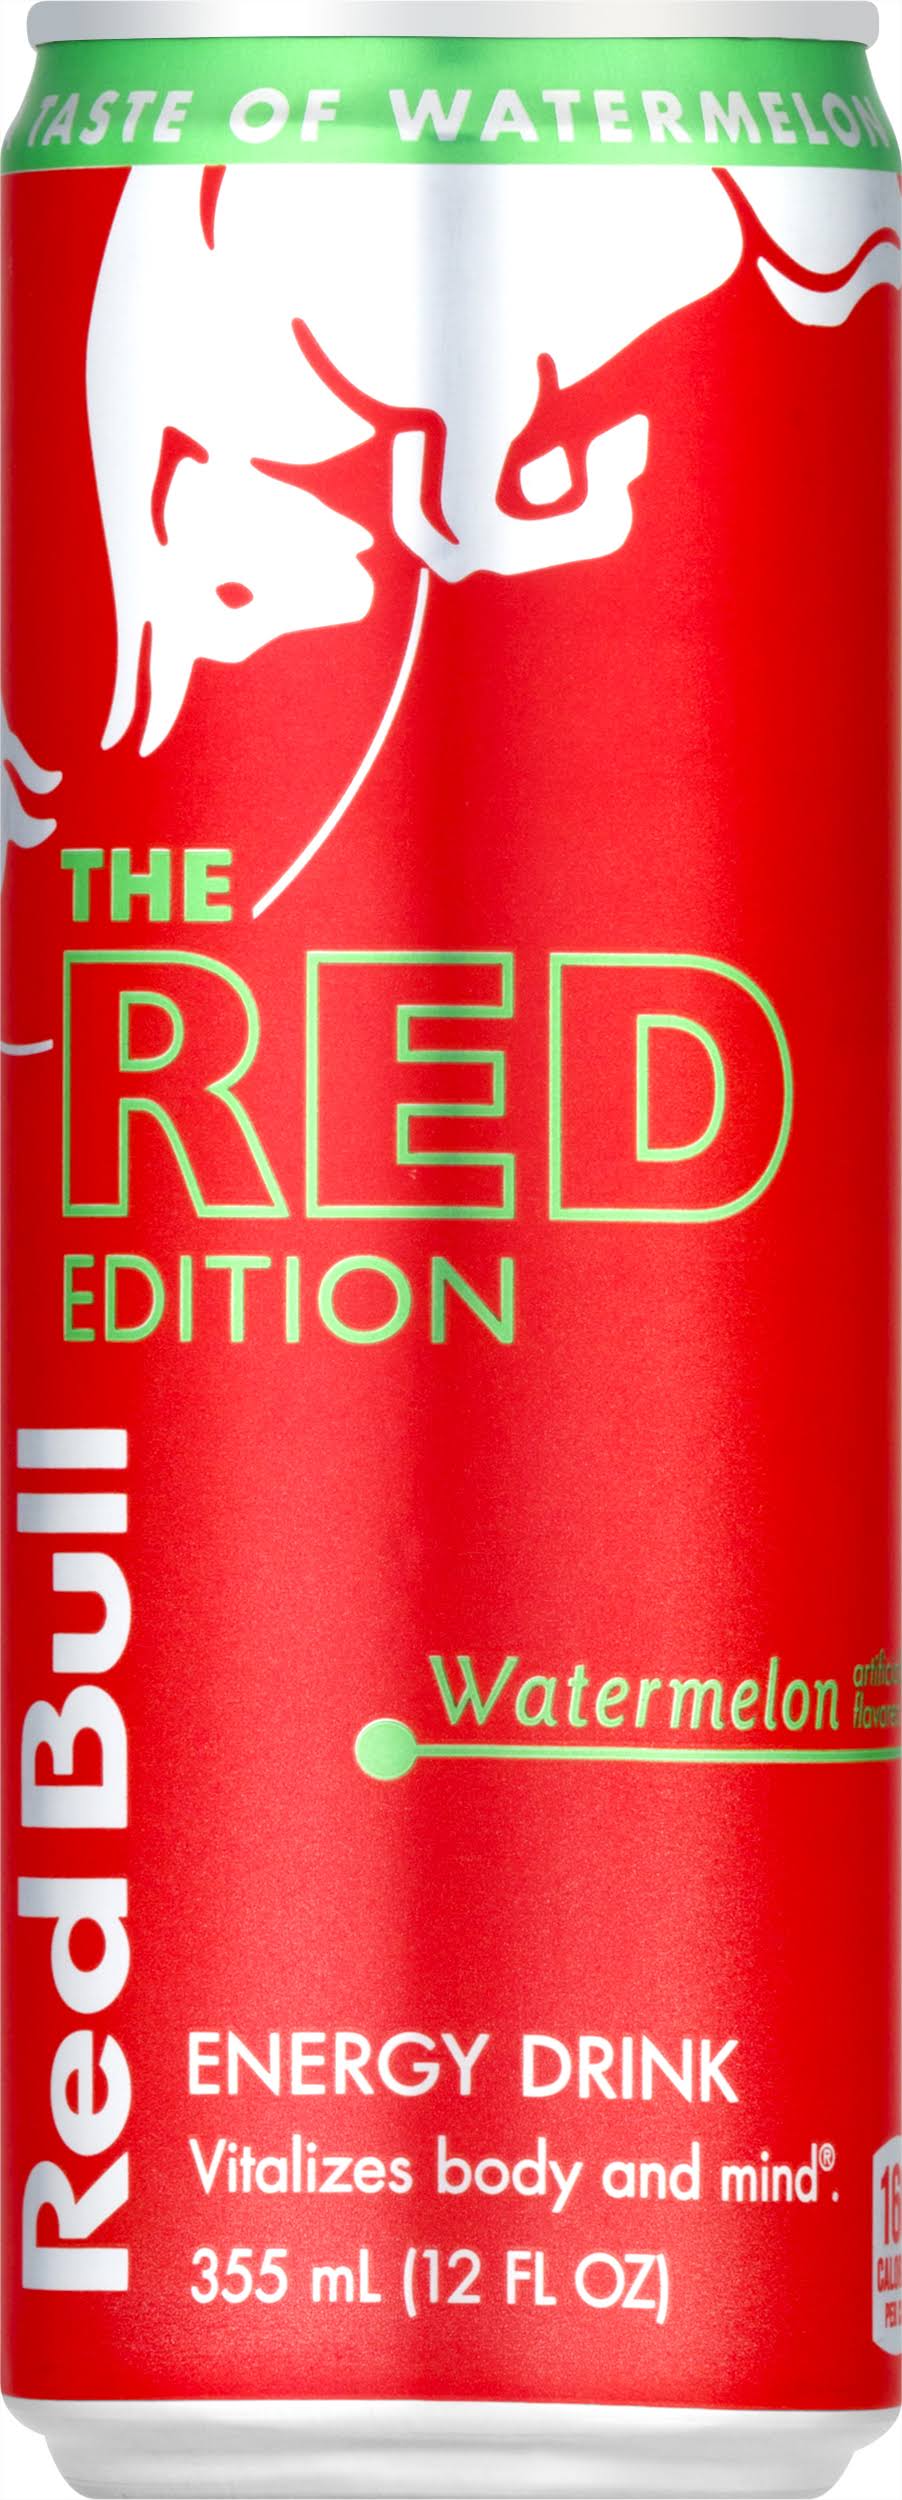 Red Bull RB234435 Energy Drink, Watermelon Flavor, 250 ml, Can 24 Pack